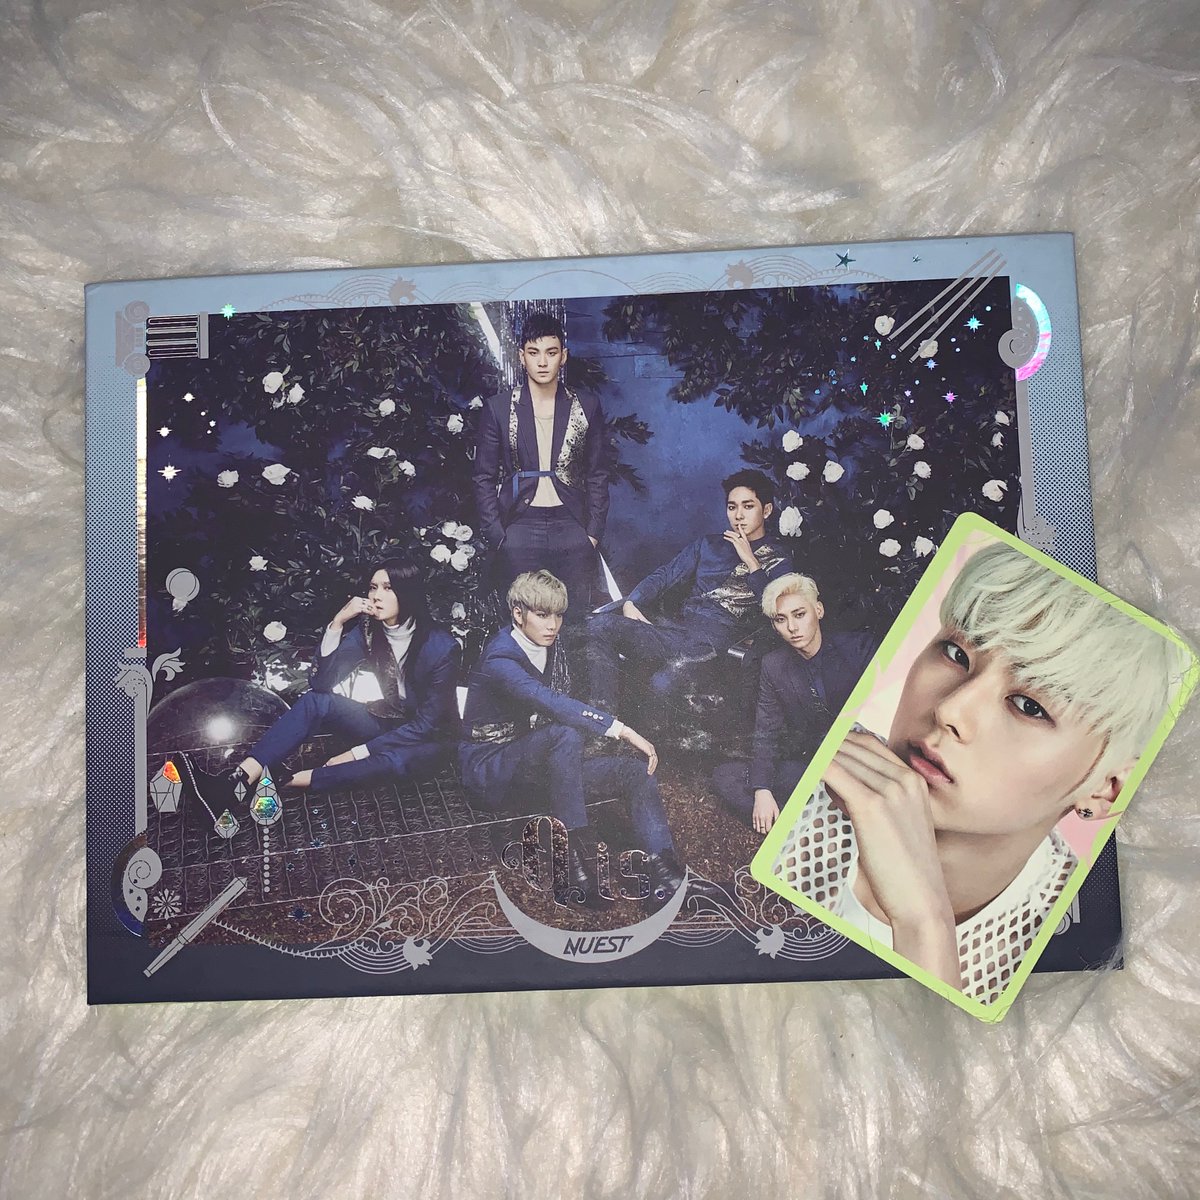 nu'est - action -$10 (Plus Shipping)nu'est - hello-$10 (Plus Shipping)nu'est - sleep talking-$10 (Plus Shipping)nu'est - q is-$10 (Plus Shipping)(yes, every photo card is minhyun so if you're a minhyun fan, i'll bundle all four of these together for $30 if you want!)